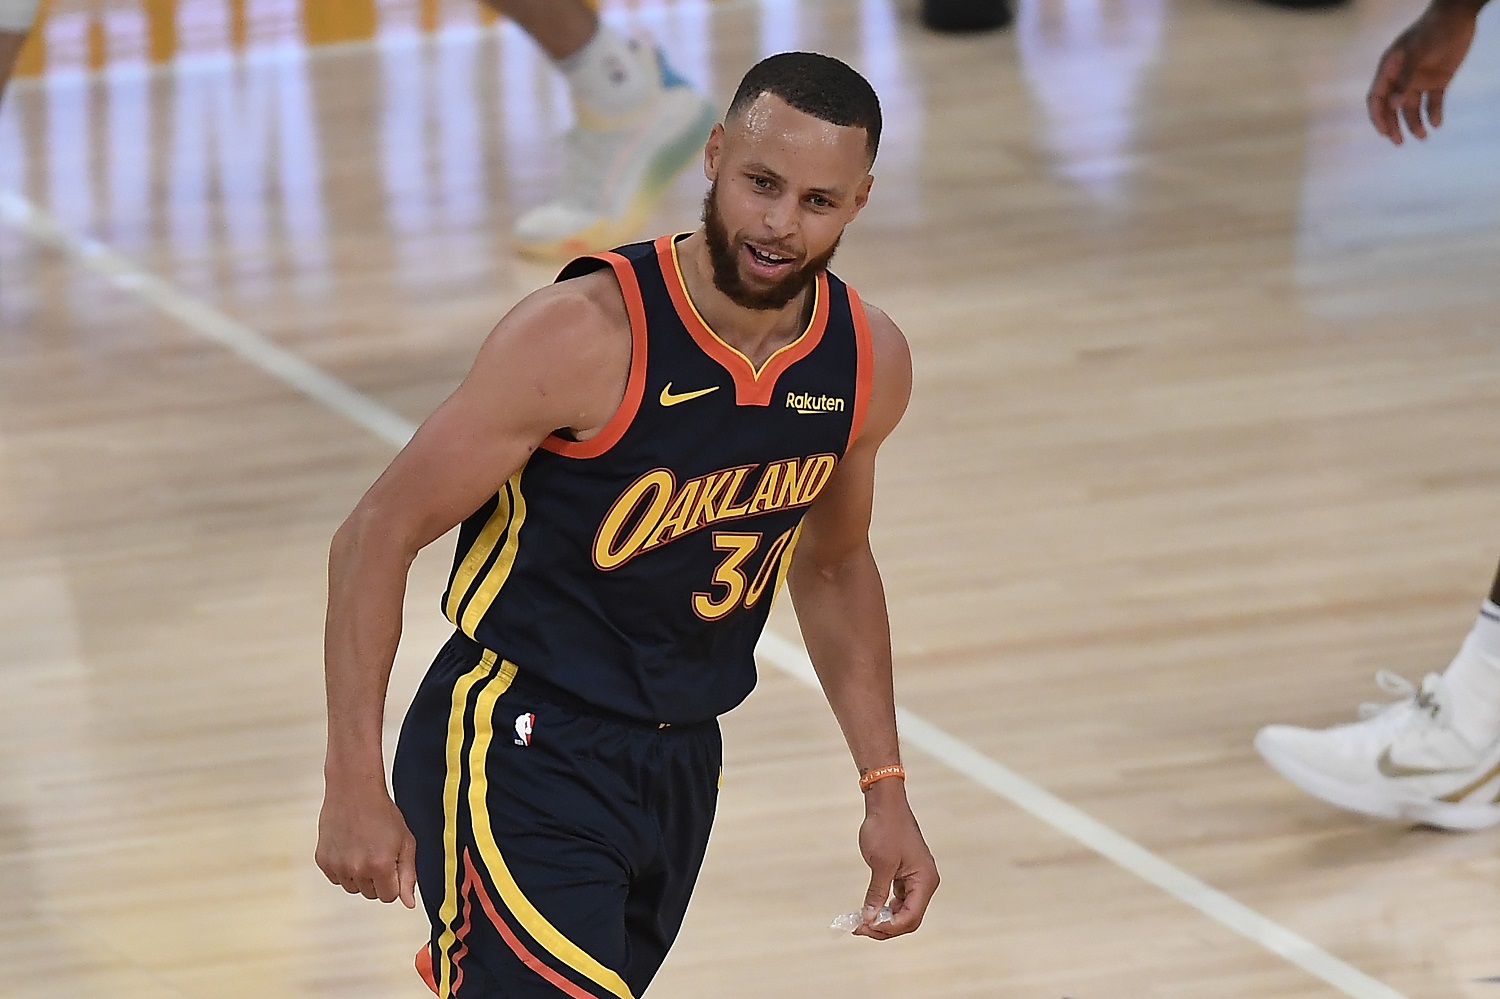 Stephen Curry reacts after hitting a 3-point shot during the NBA play-in game against the Los Angeles Lakers on May 19, 2021. | Kevork Djansezian/Getty Images